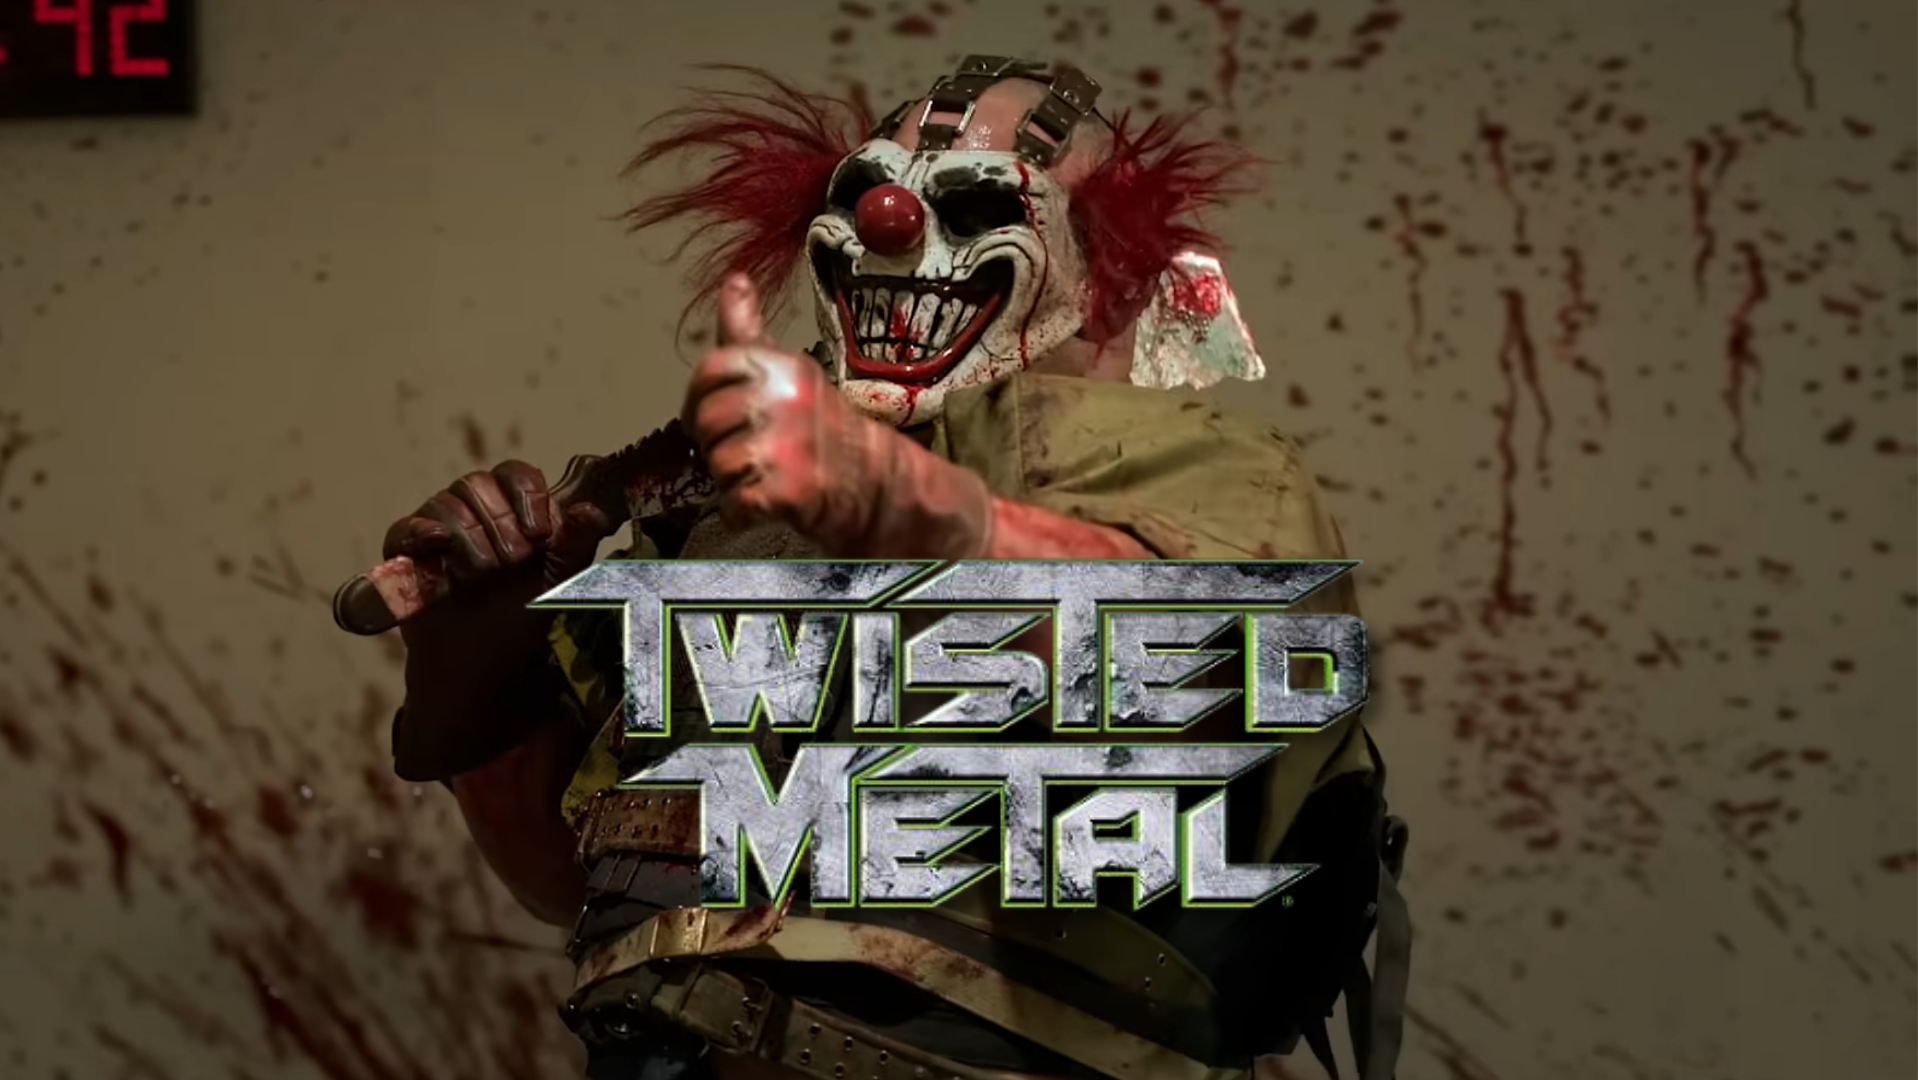 Twisted Metal: Peacock's First Trailer for Video Game Show